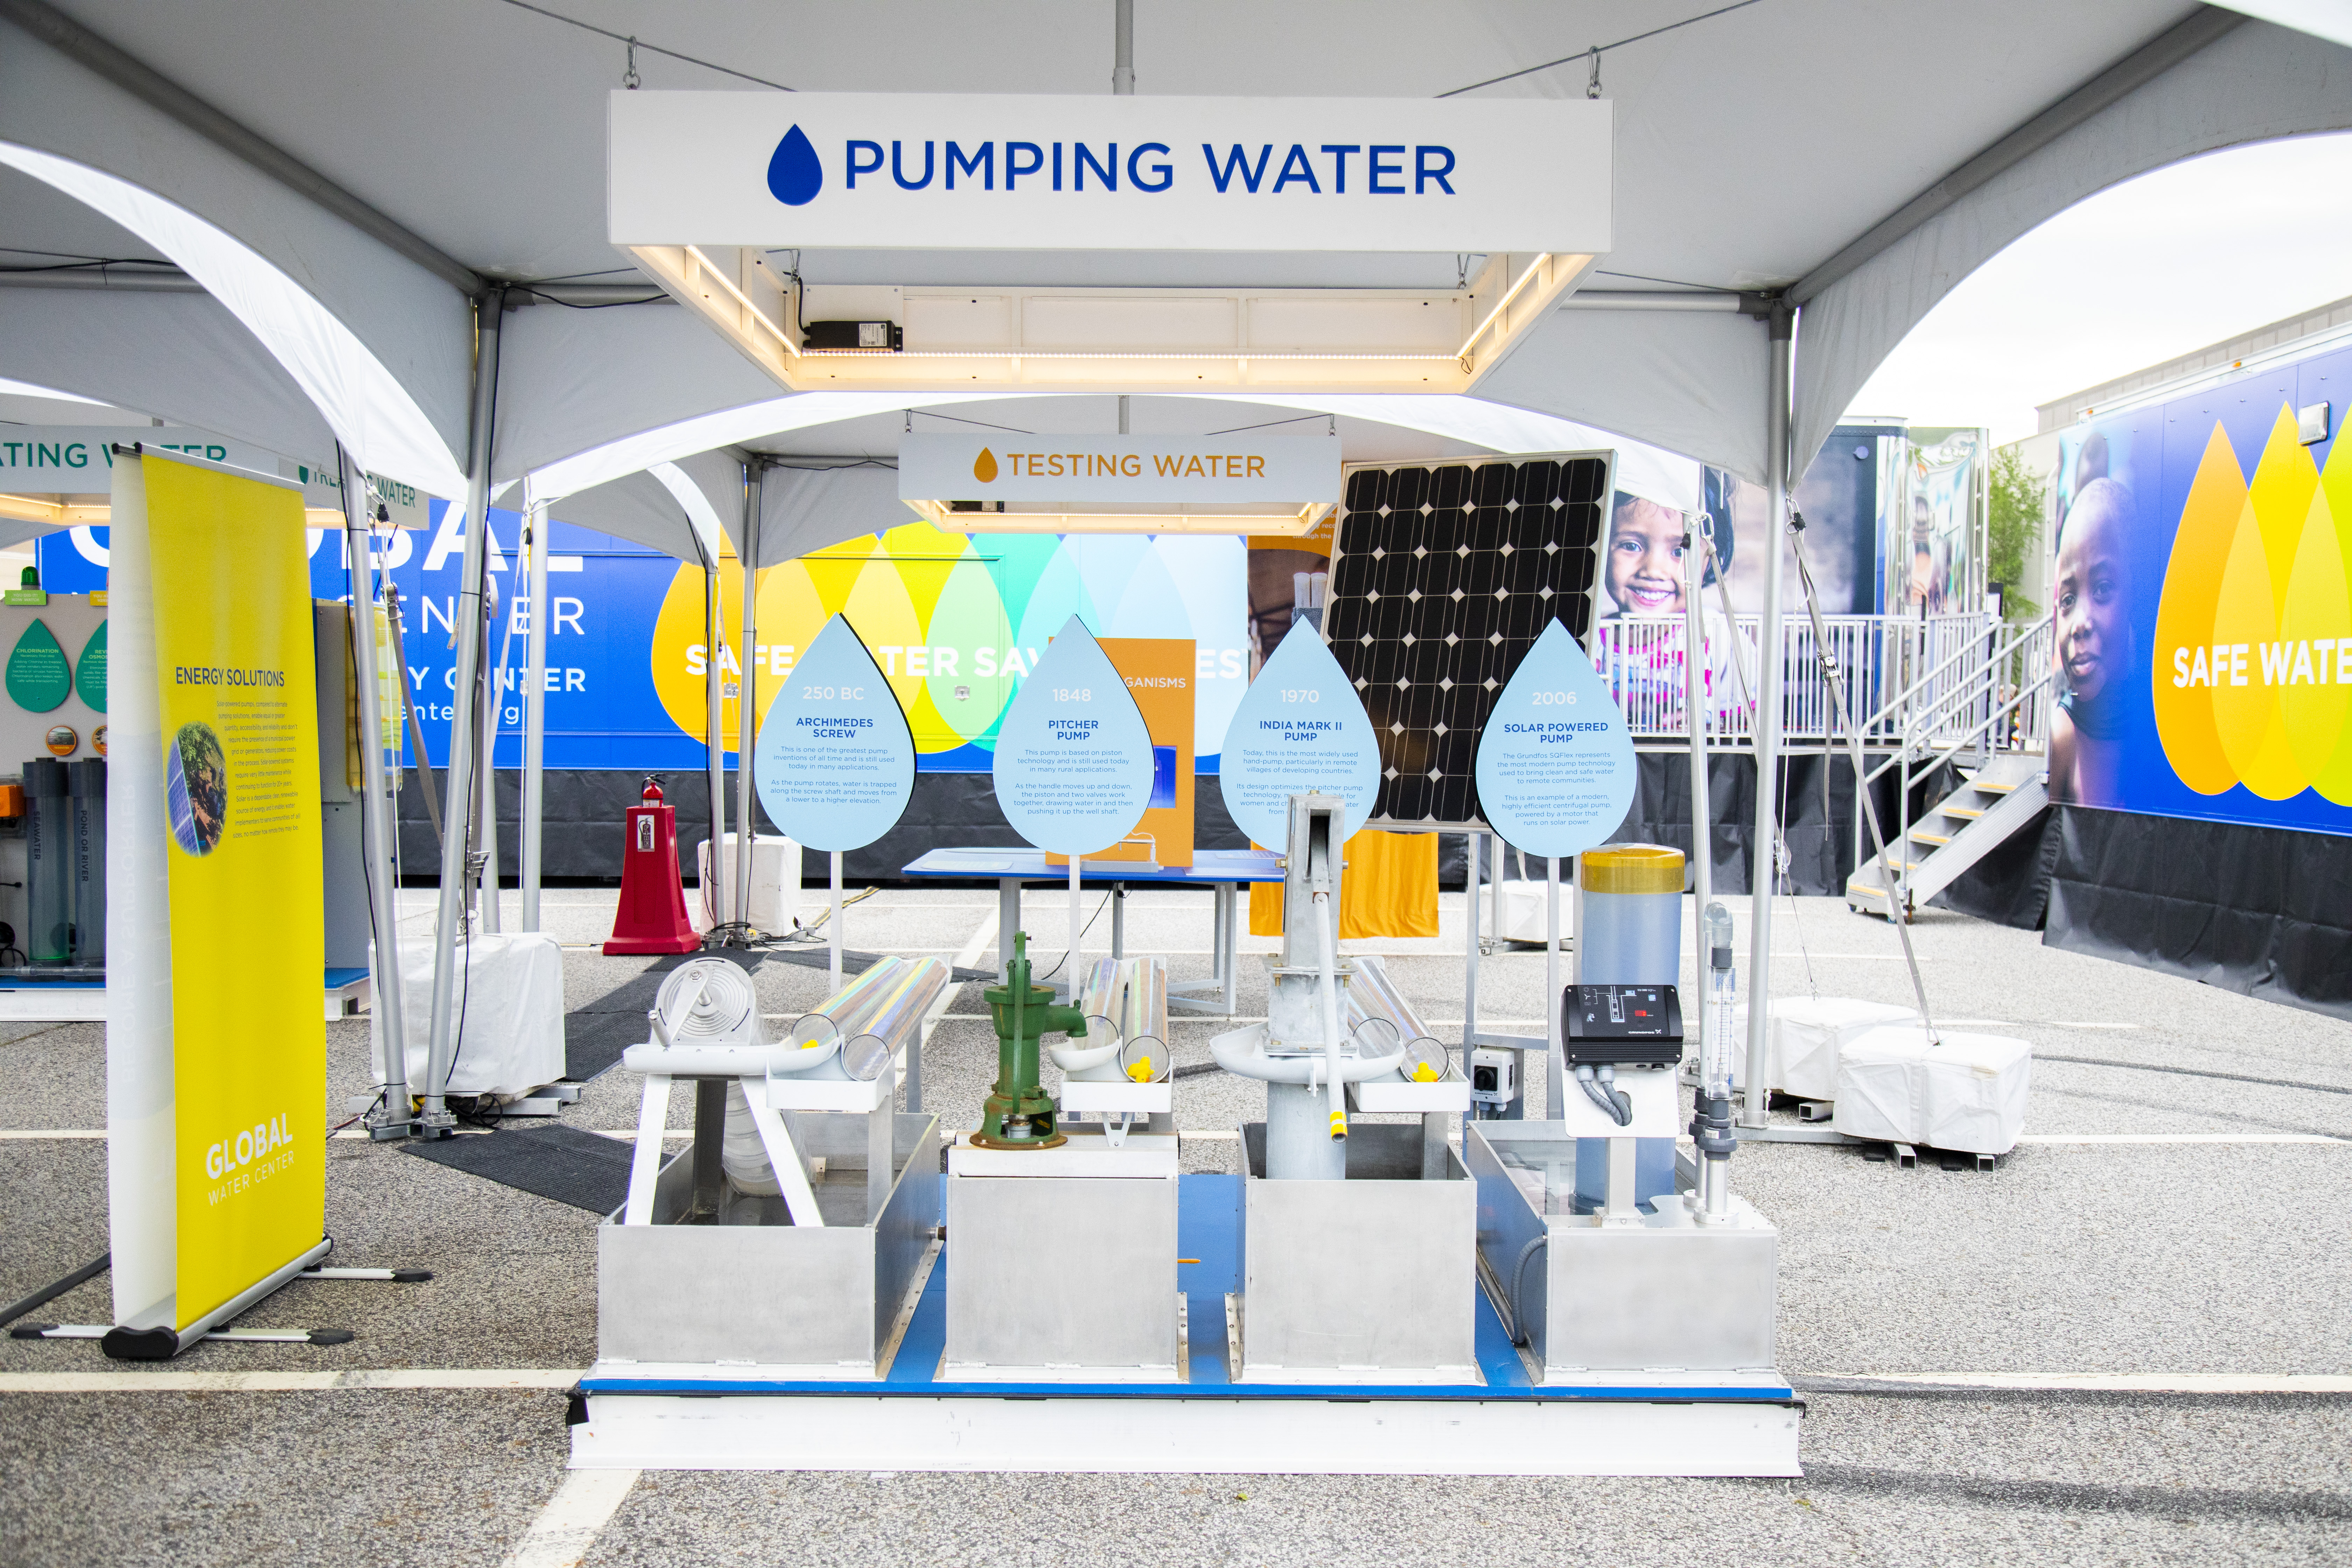 Outdoor pavilions offer hands-on activities for learning about water testing, solar-powered systems, and water treatment.